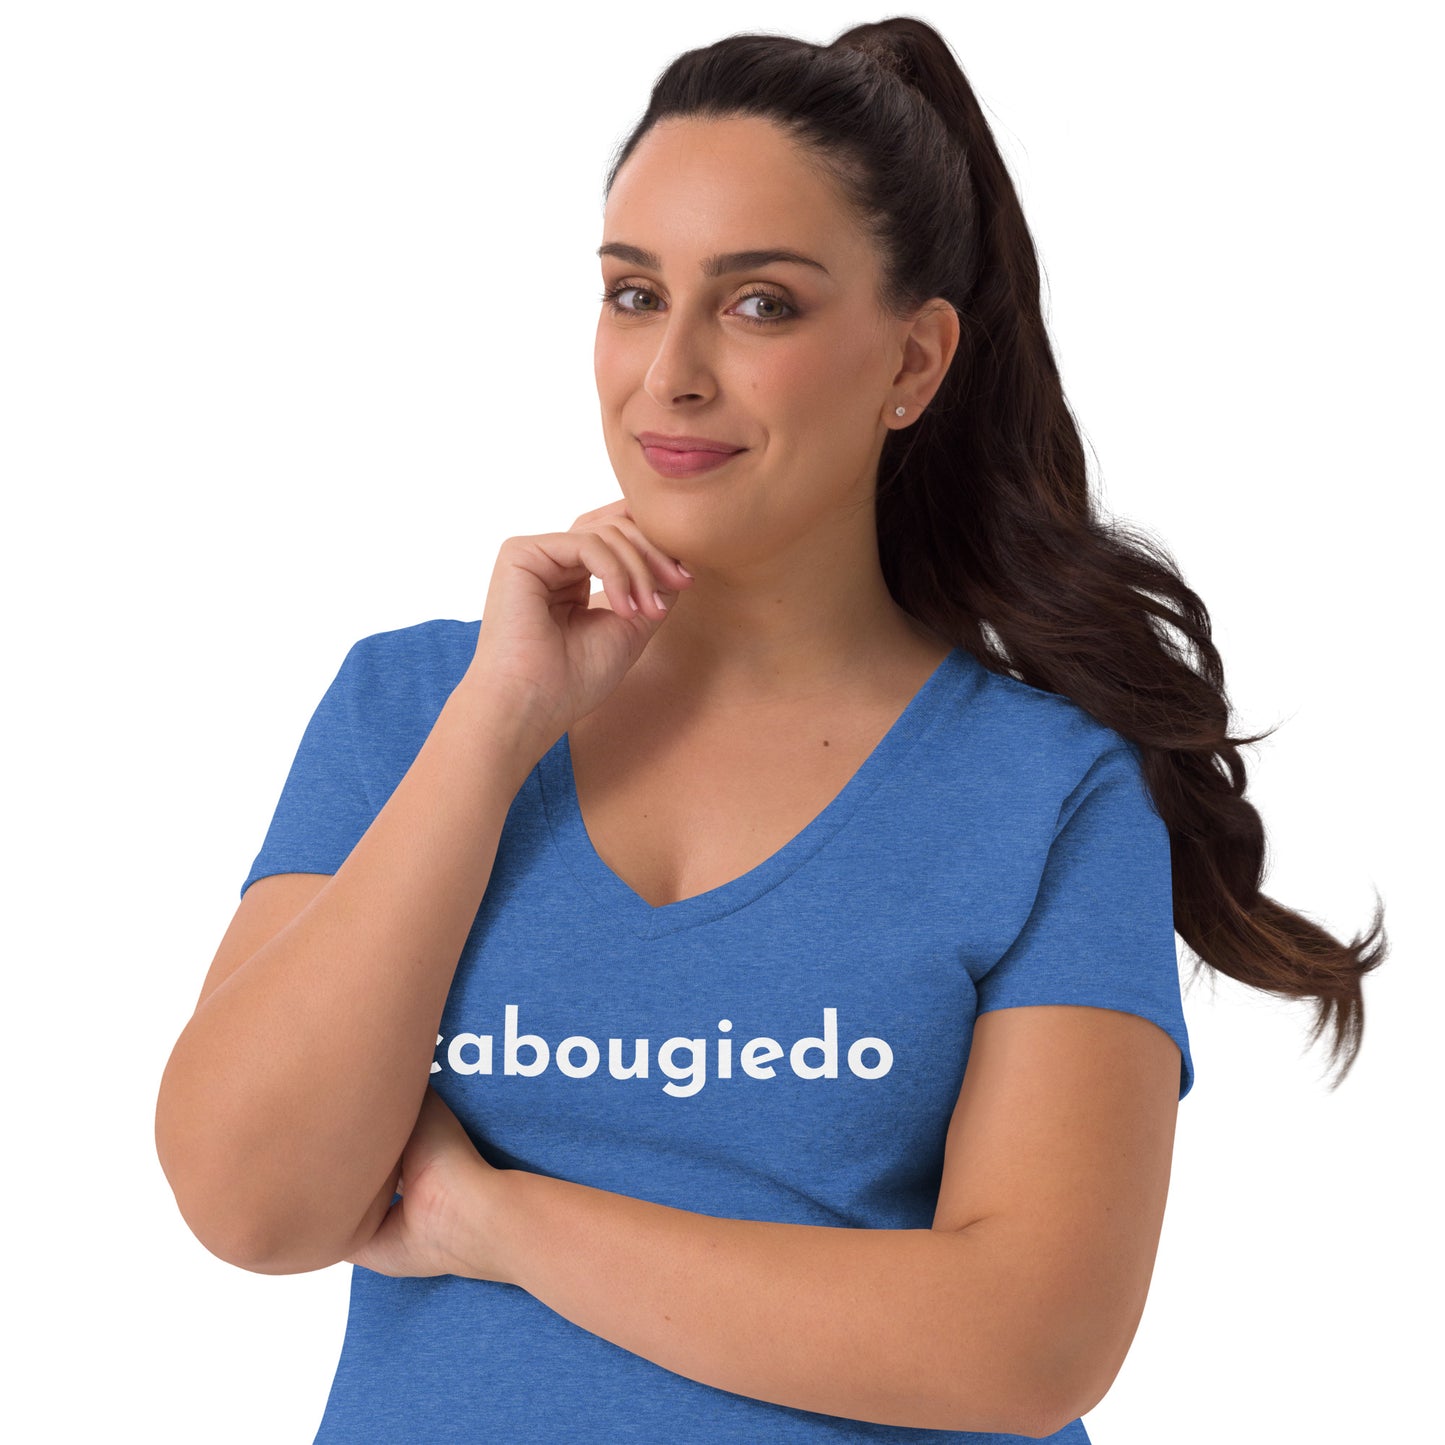 Women’s recycled v-neck t-shirt - CaBougieDo